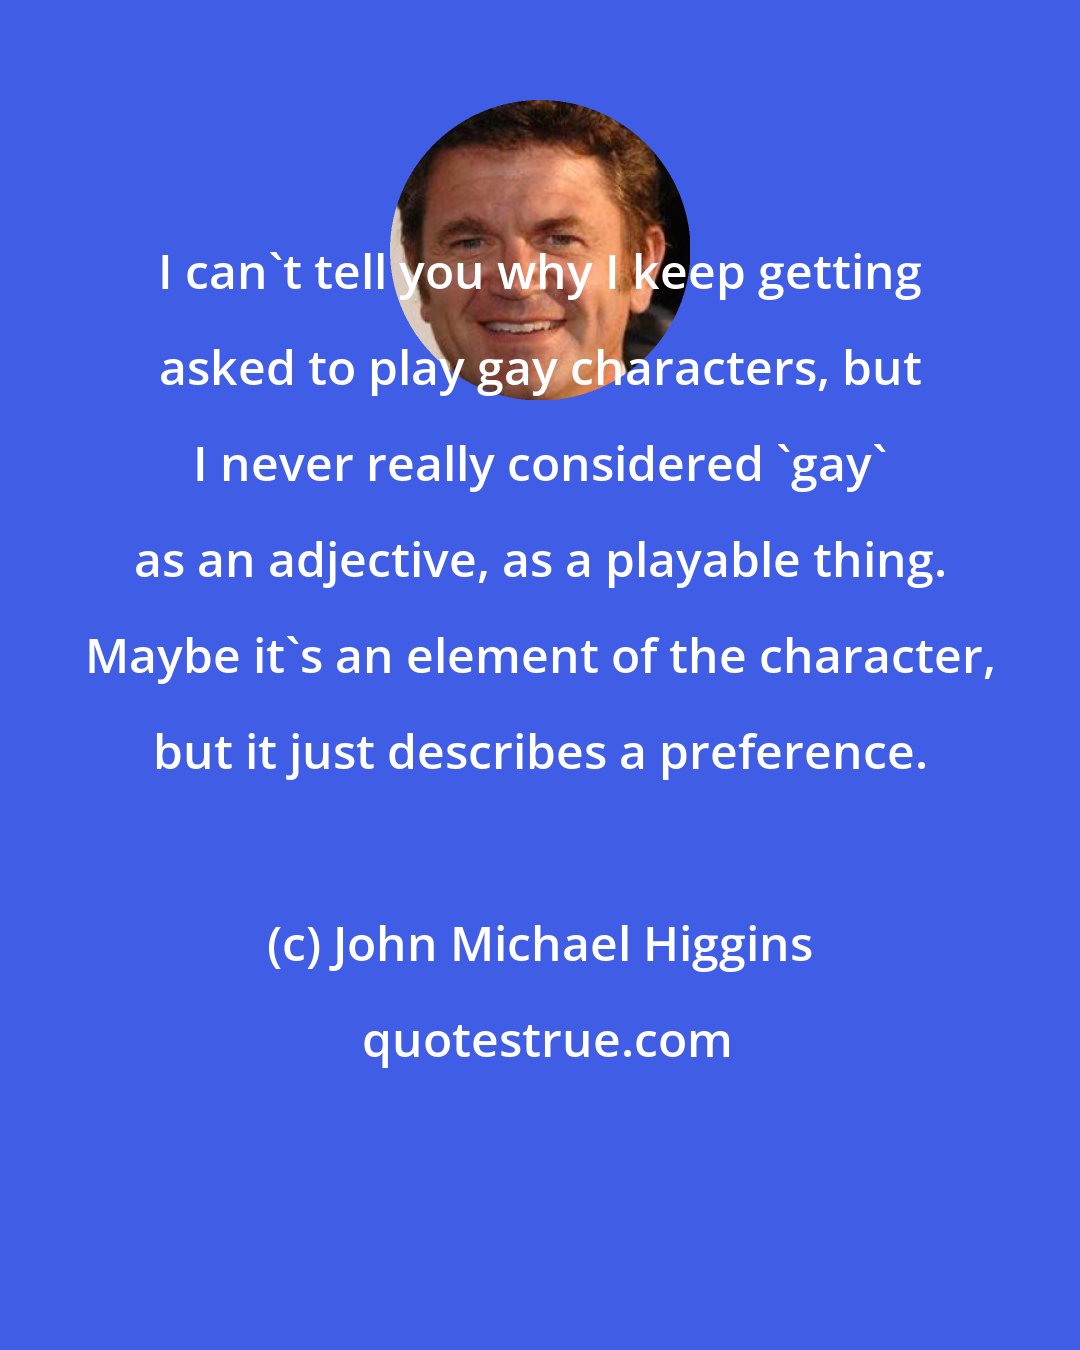 John Michael Higgins: I can't tell you why I keep getting asked to play gay characters, but I never really considered 'gay' as an adjective, as a playable thing. Maybe it's an element of the character, but it just describes a preference.